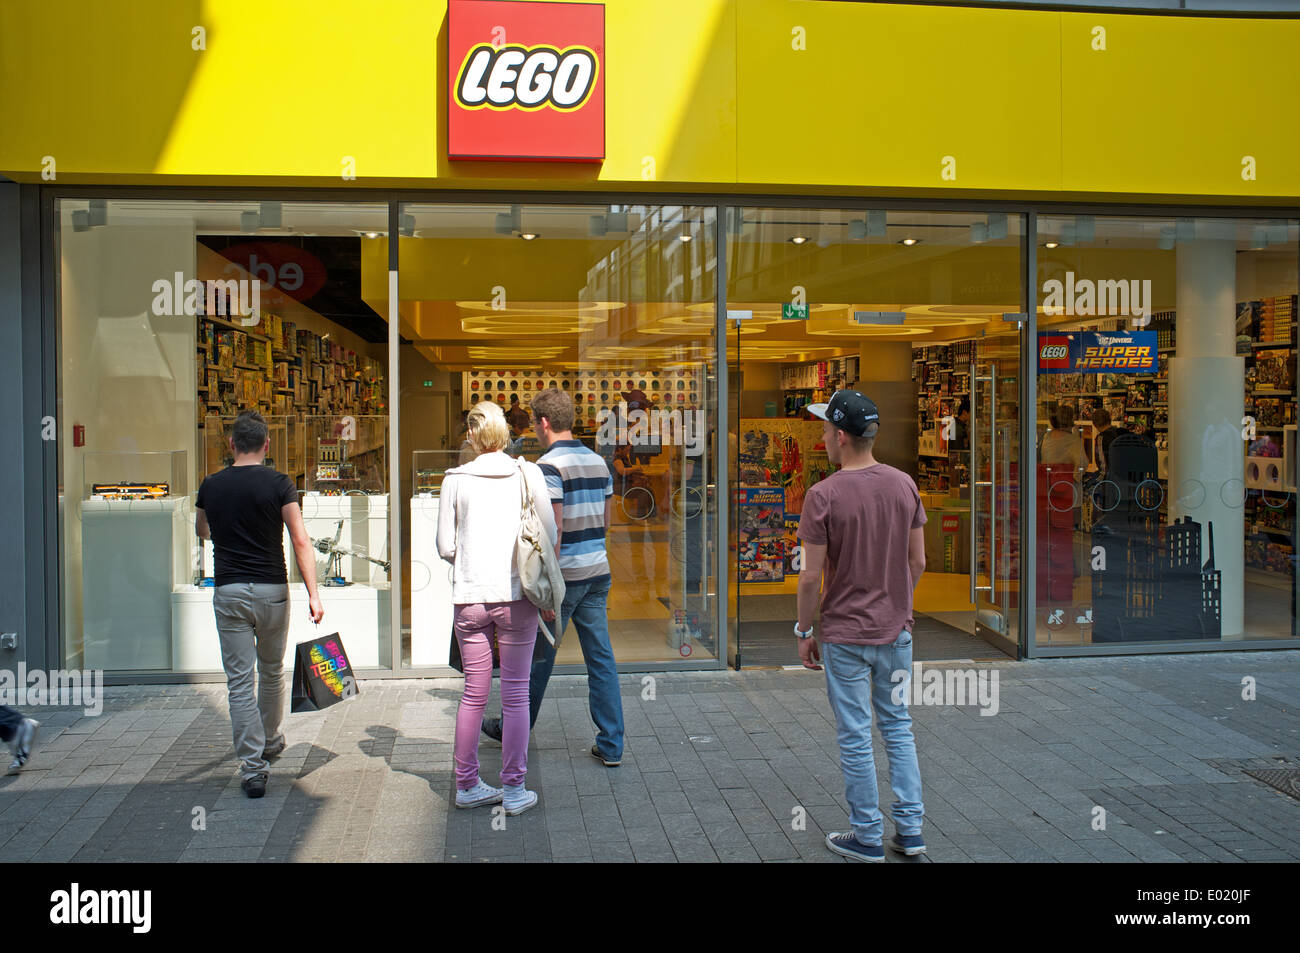 Toys Shop Lego High Resolution Stock Photography and Images - Alamy